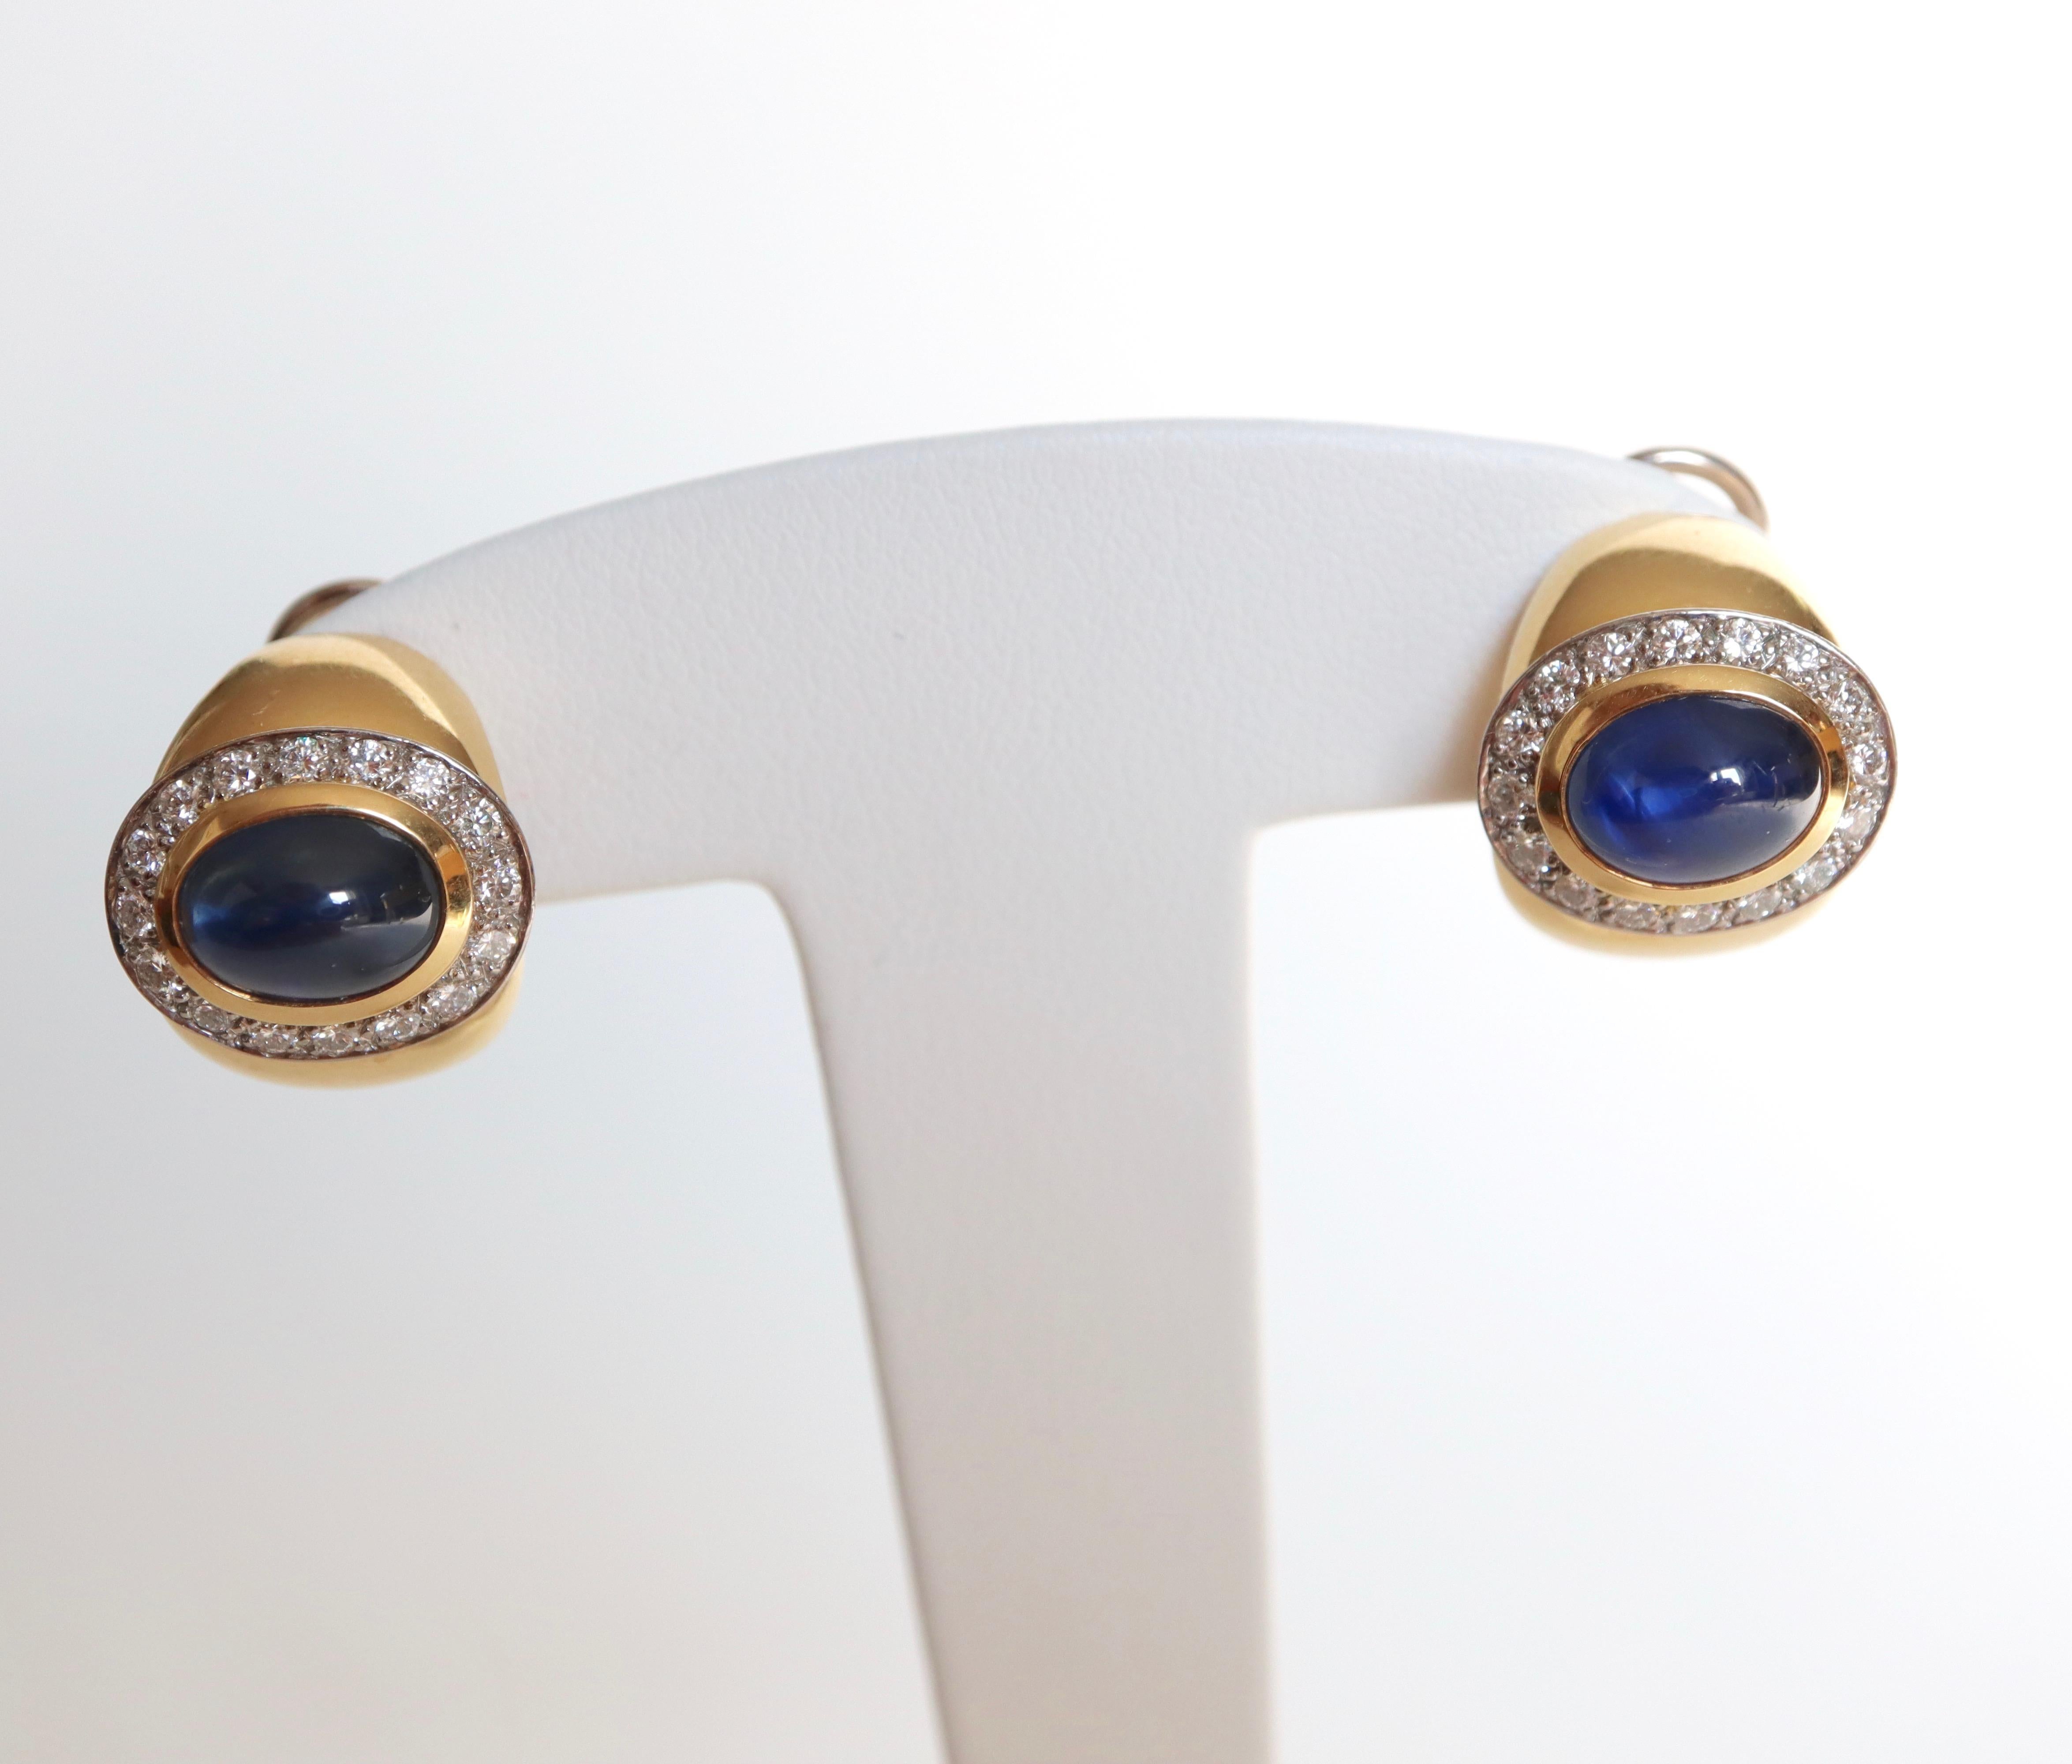 Wempe 18 Karat Yellow Gold and White Gold Earrings Set with Cabochon Sapphires 5